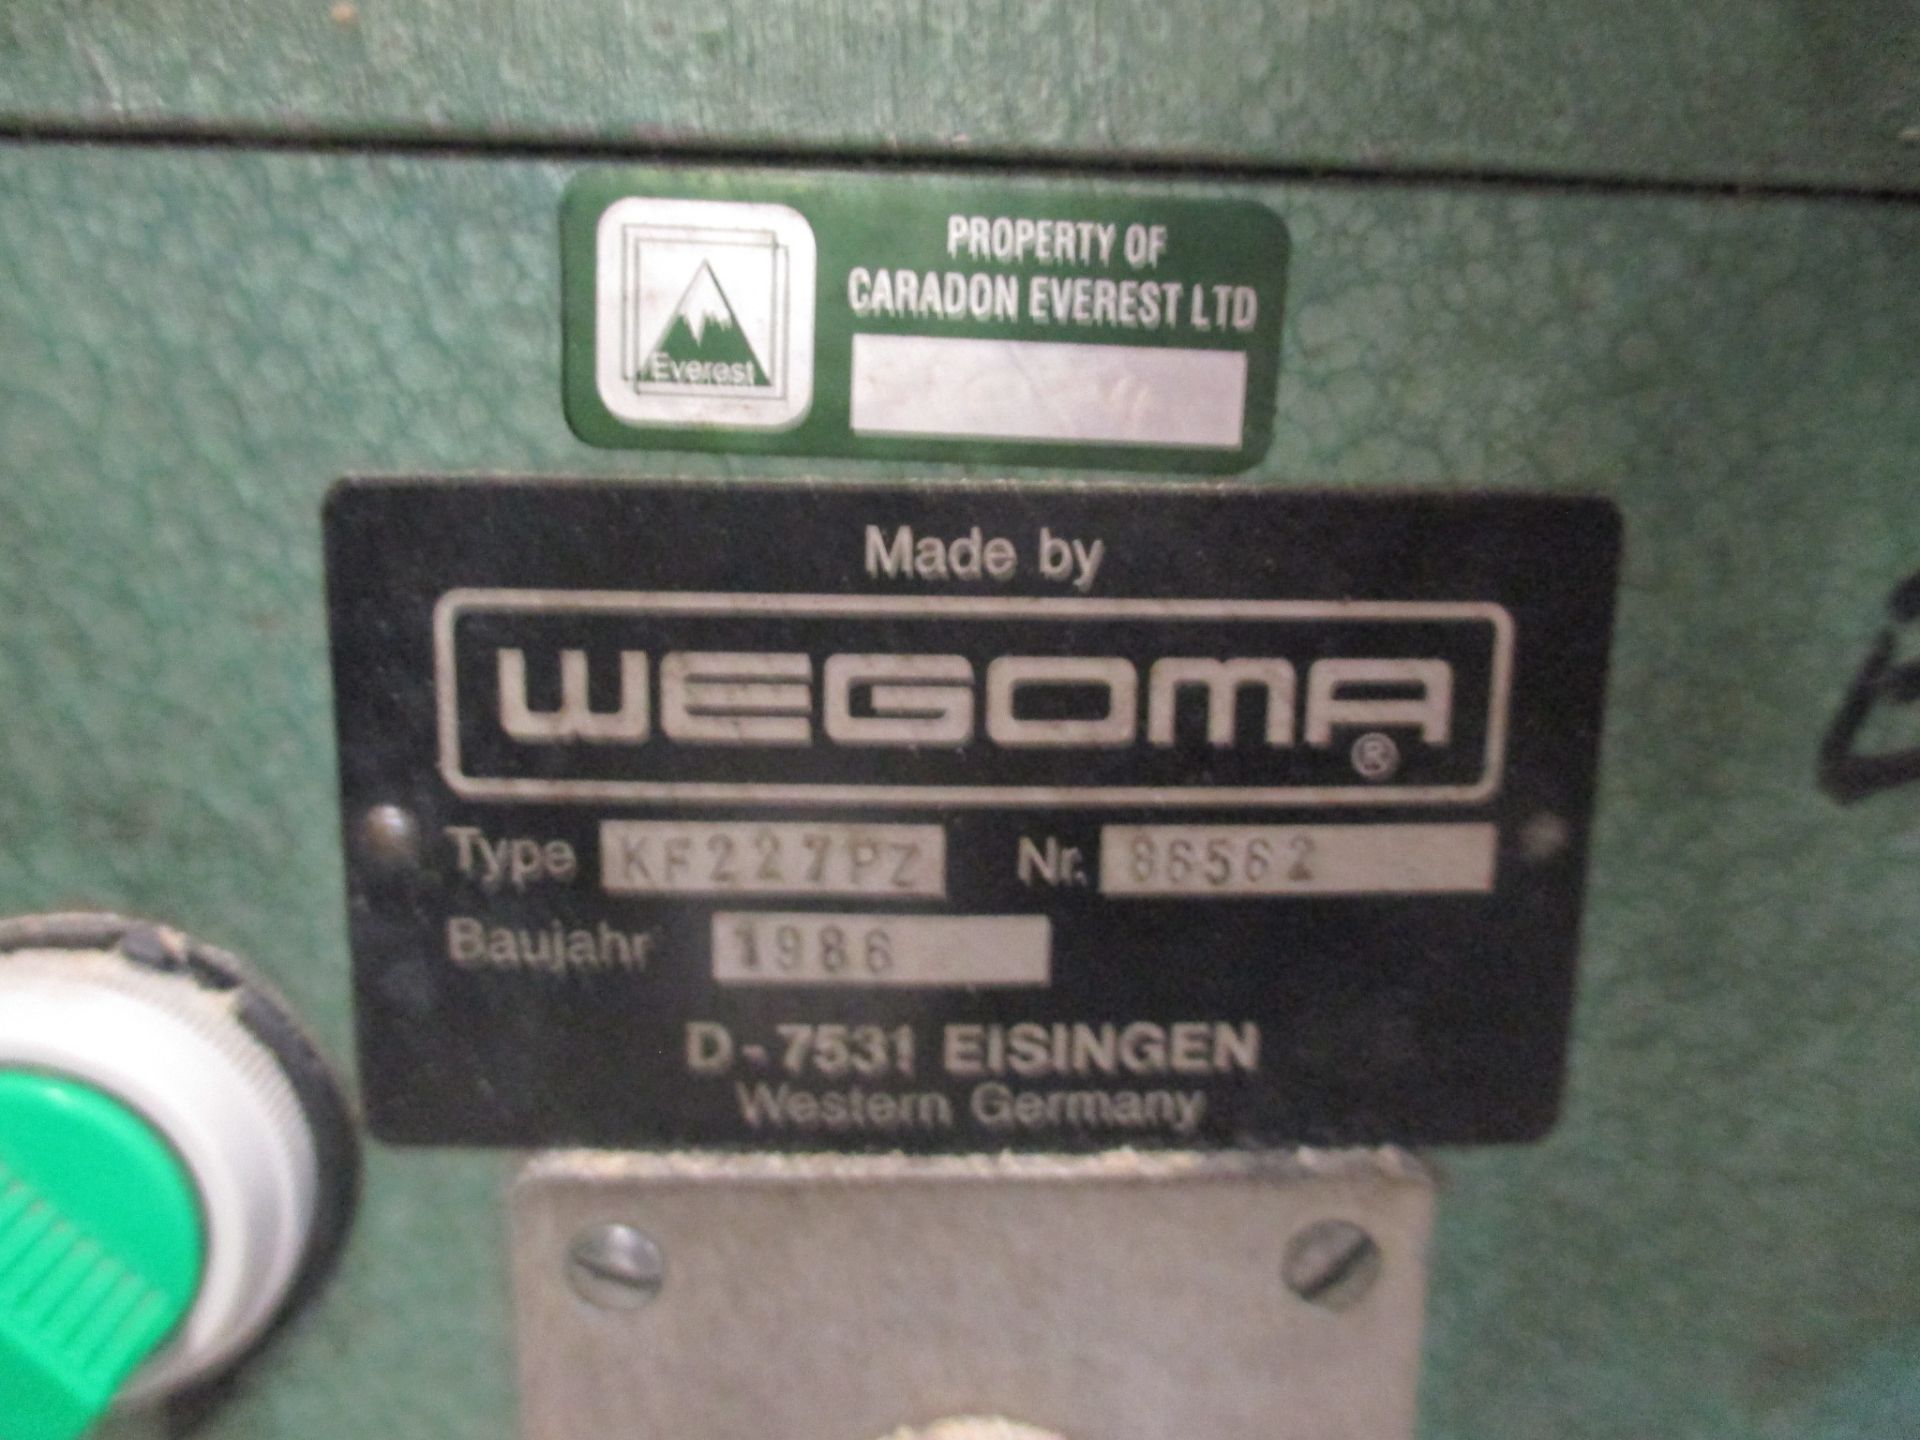 1: Wedoma, KF277 PZ, Copy Router, Serial Number: 86562, Year of Manufacture: 1986 - Bild 2 aus 2